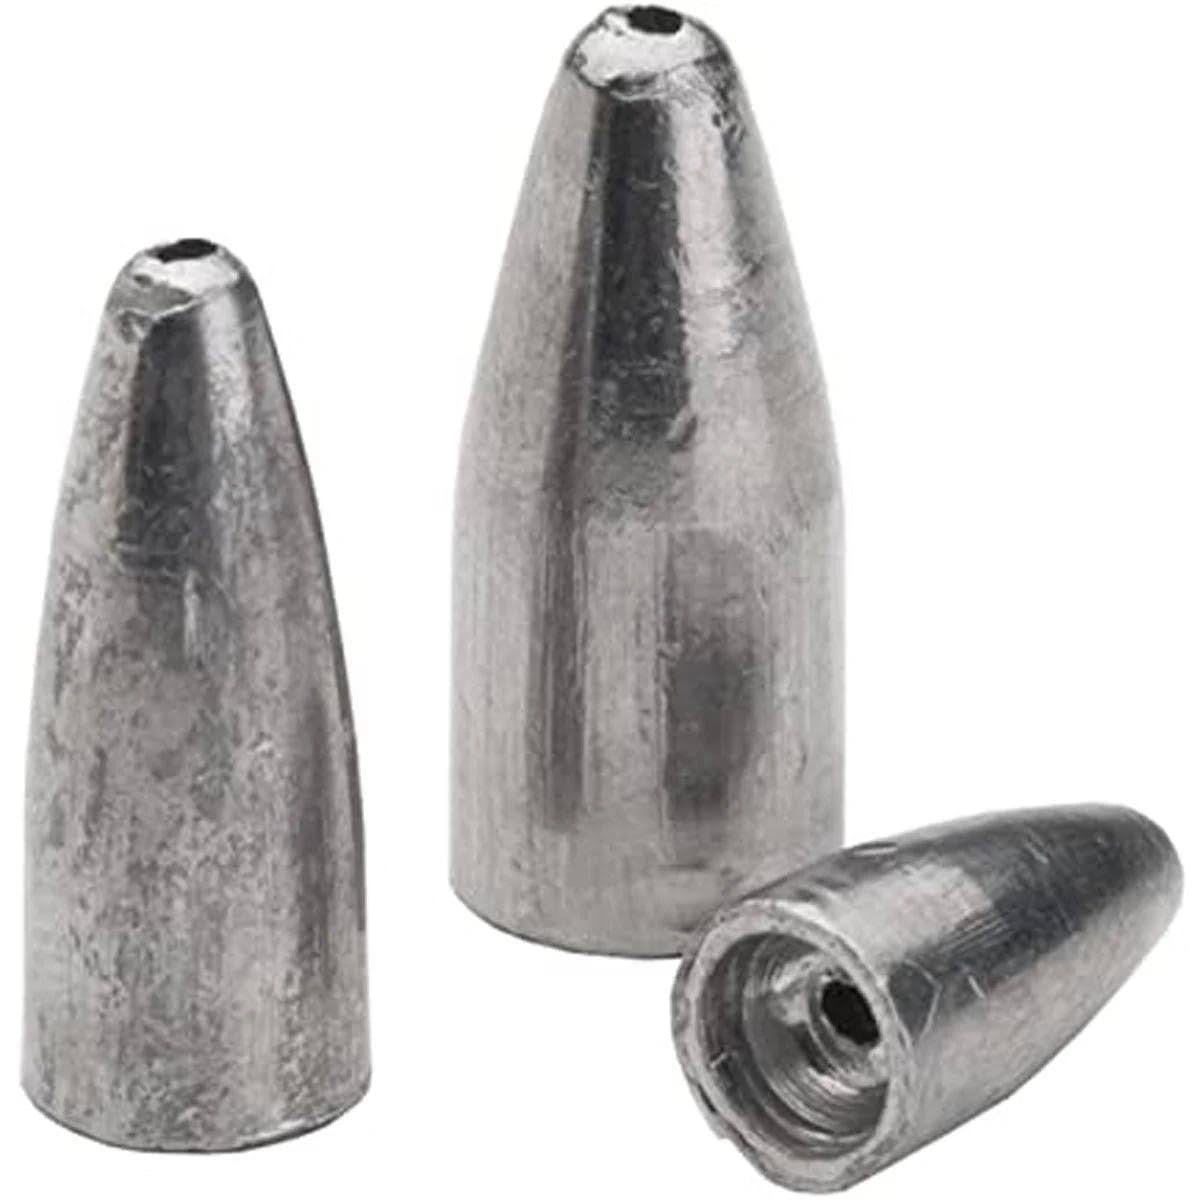 Bullet Weight Worm Weights